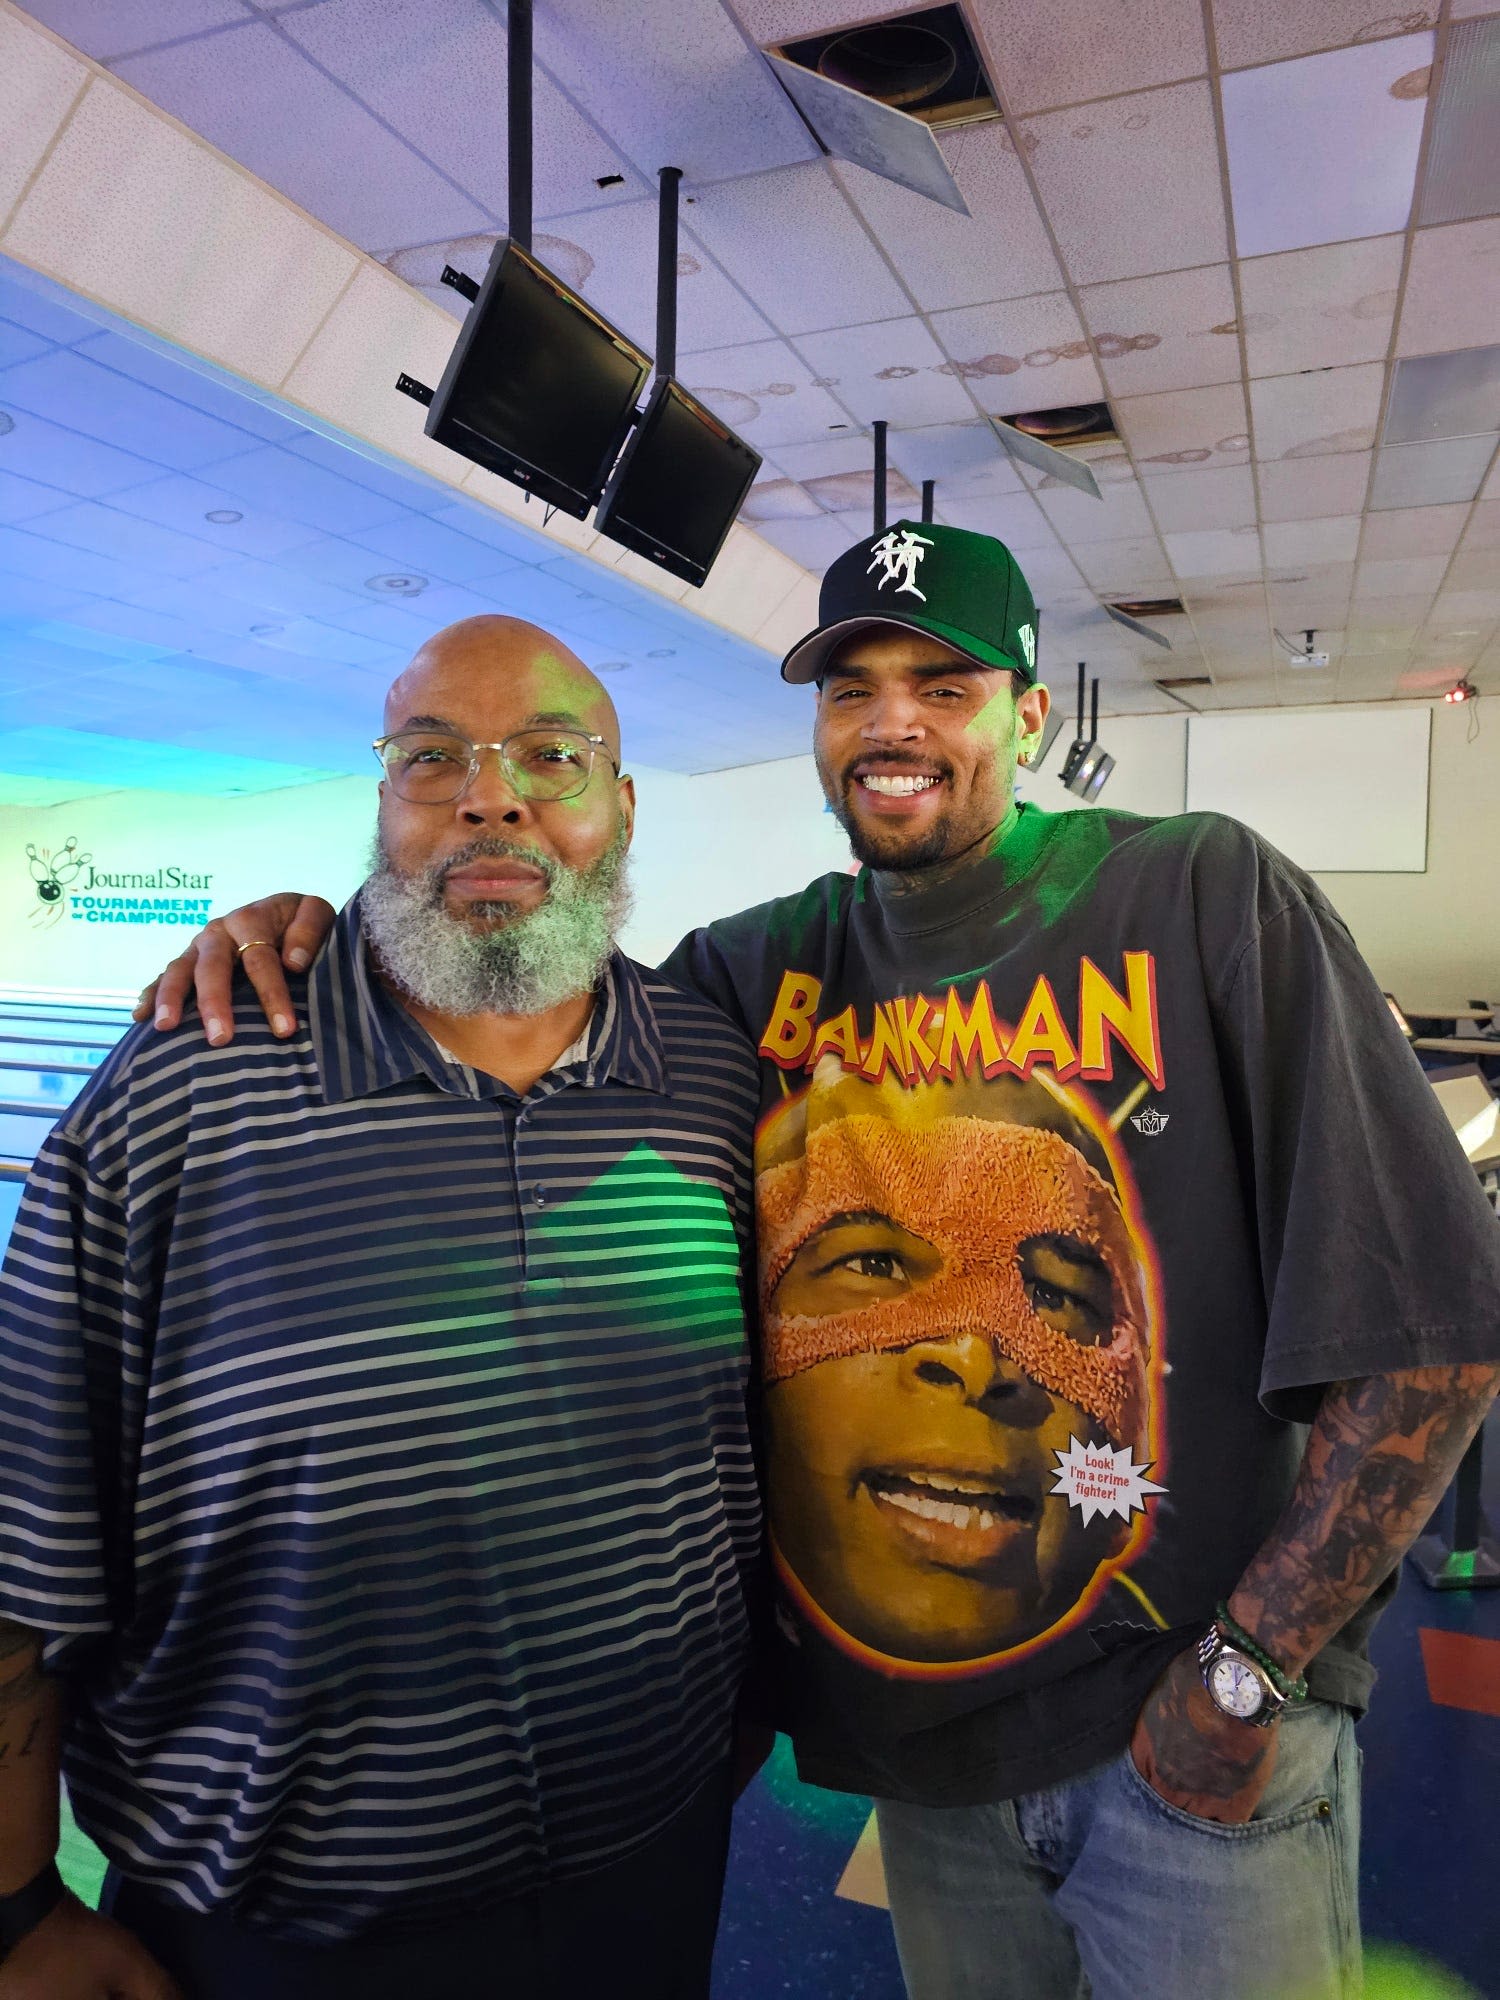 R&B superstar Chris Brown spends Saturday night at Peoria, Illinois bowling alley